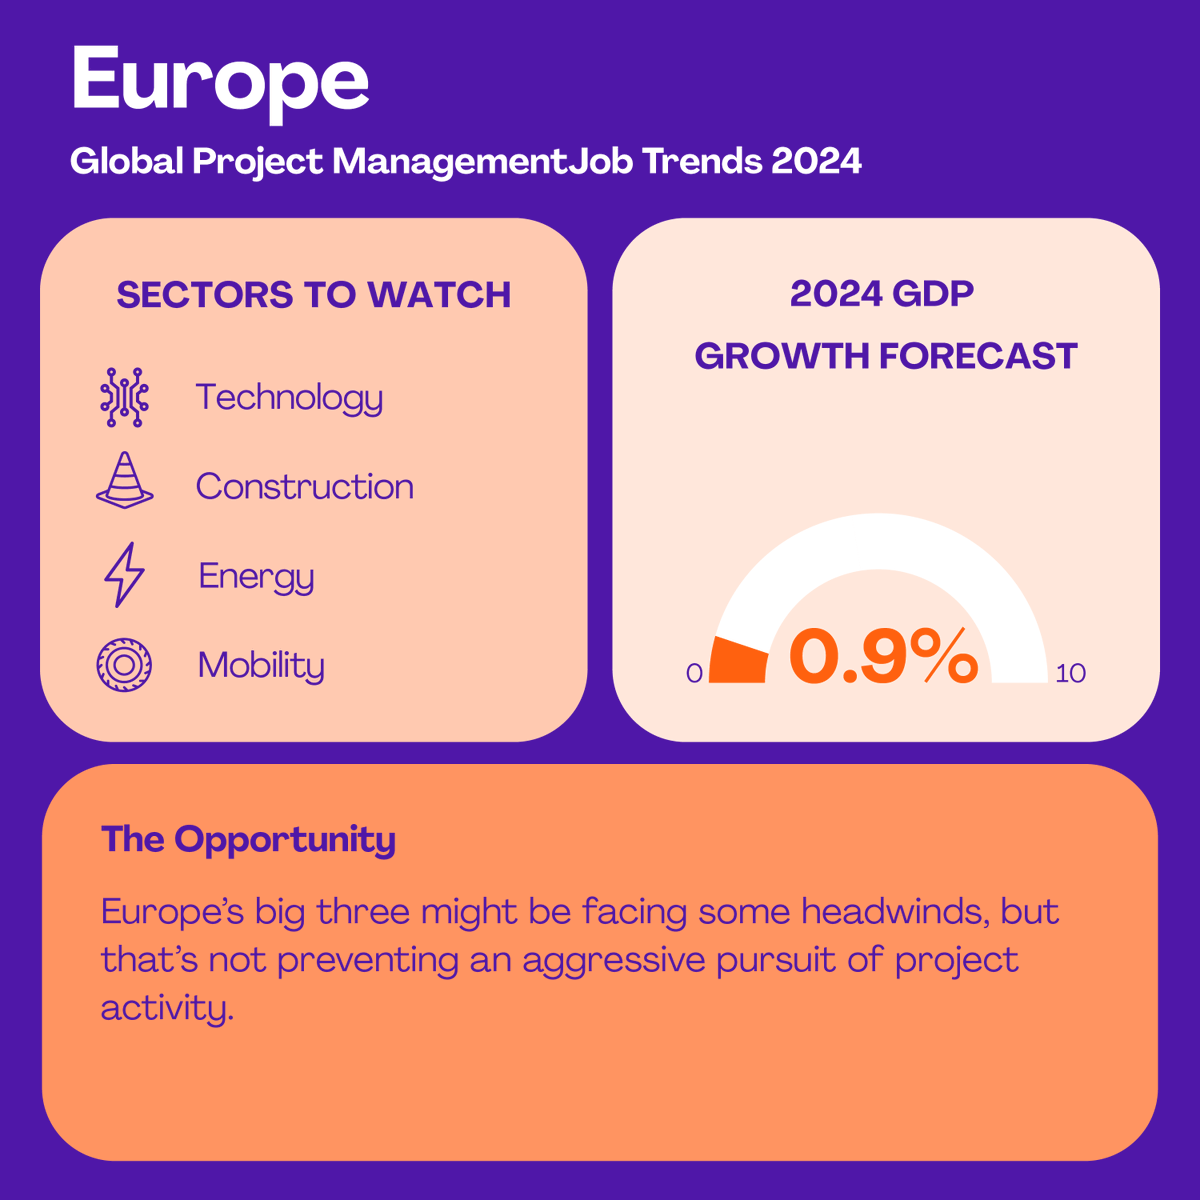 Get more insight on Europe and other regional breakdowns in our Global Project Management Job Trends 2024 report: bit.ly/3vYjXR1